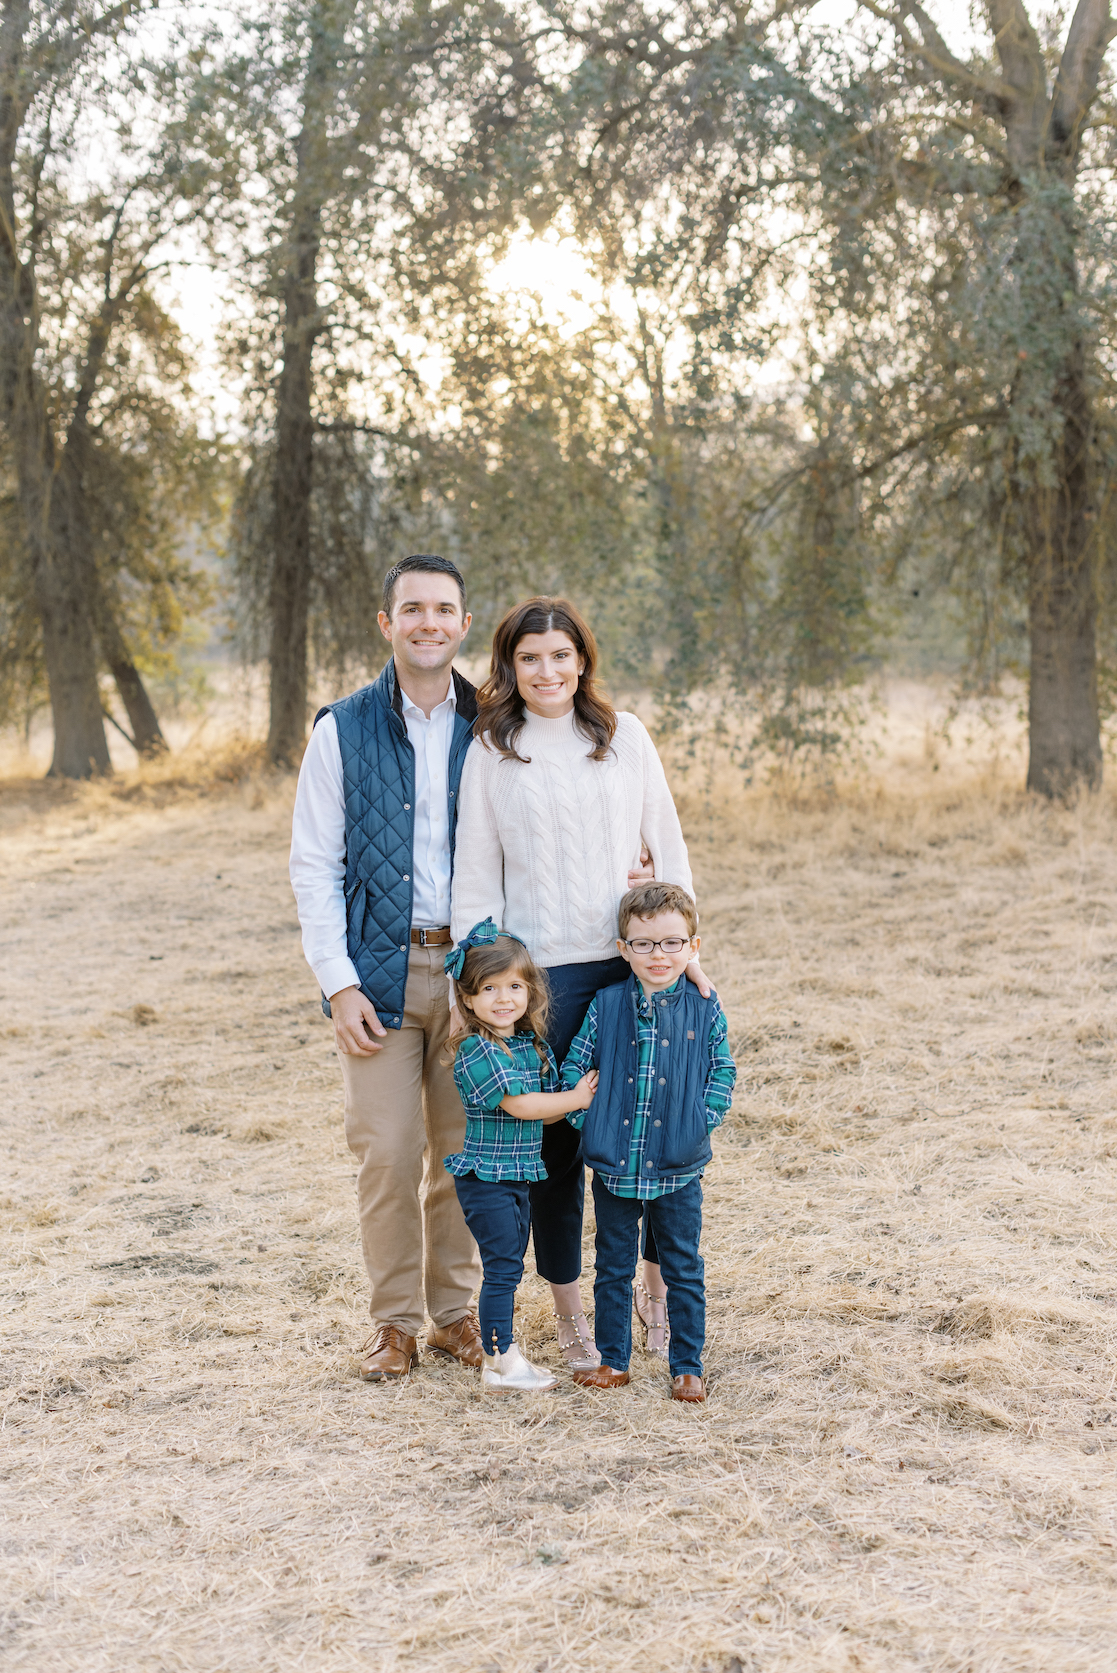 posed family portrait of parents, son, and daughter for holiday card